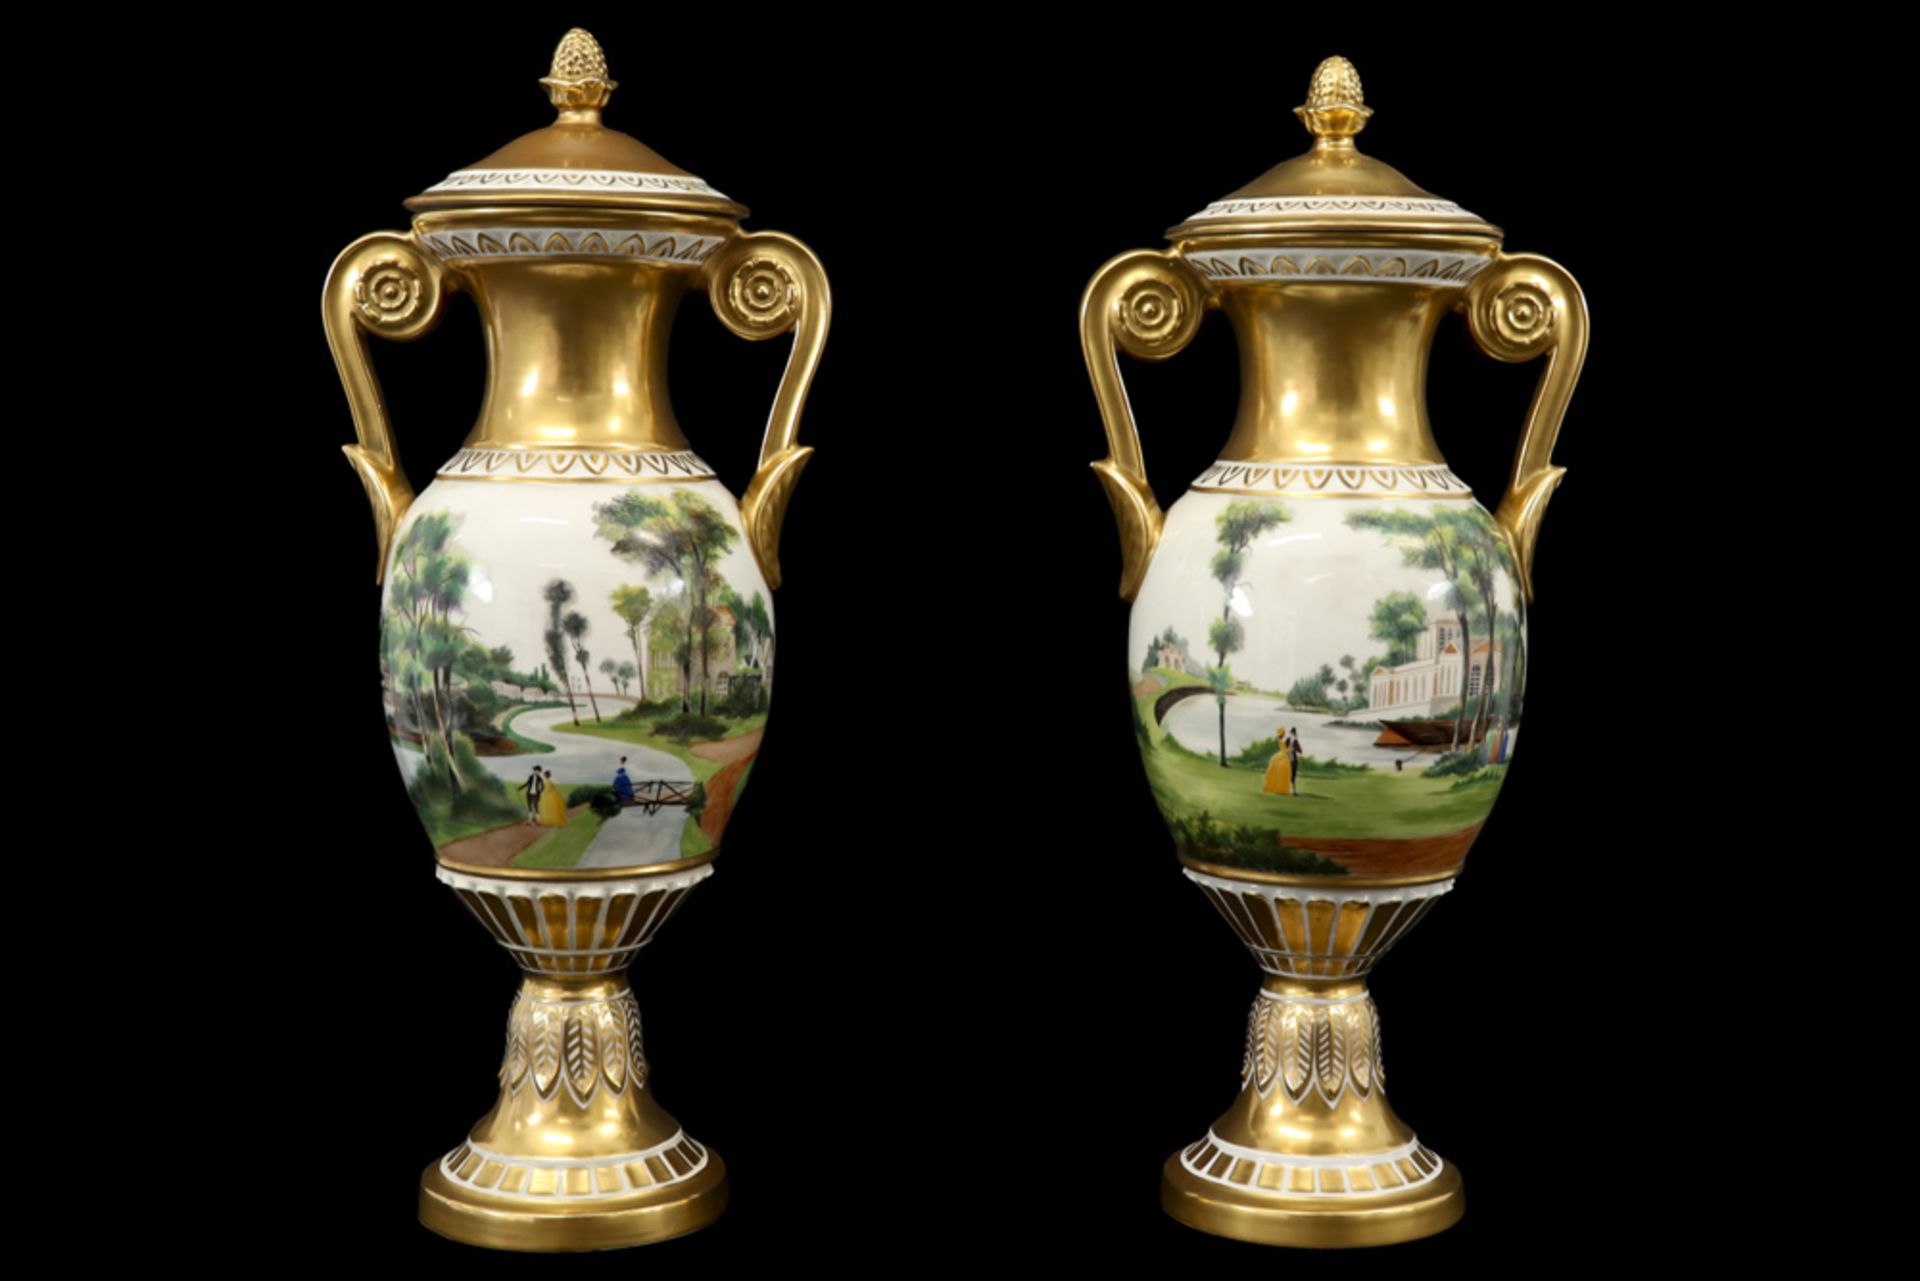 pair of neoclassical lidded vases in porcelain with painted landscape decors ||Paar